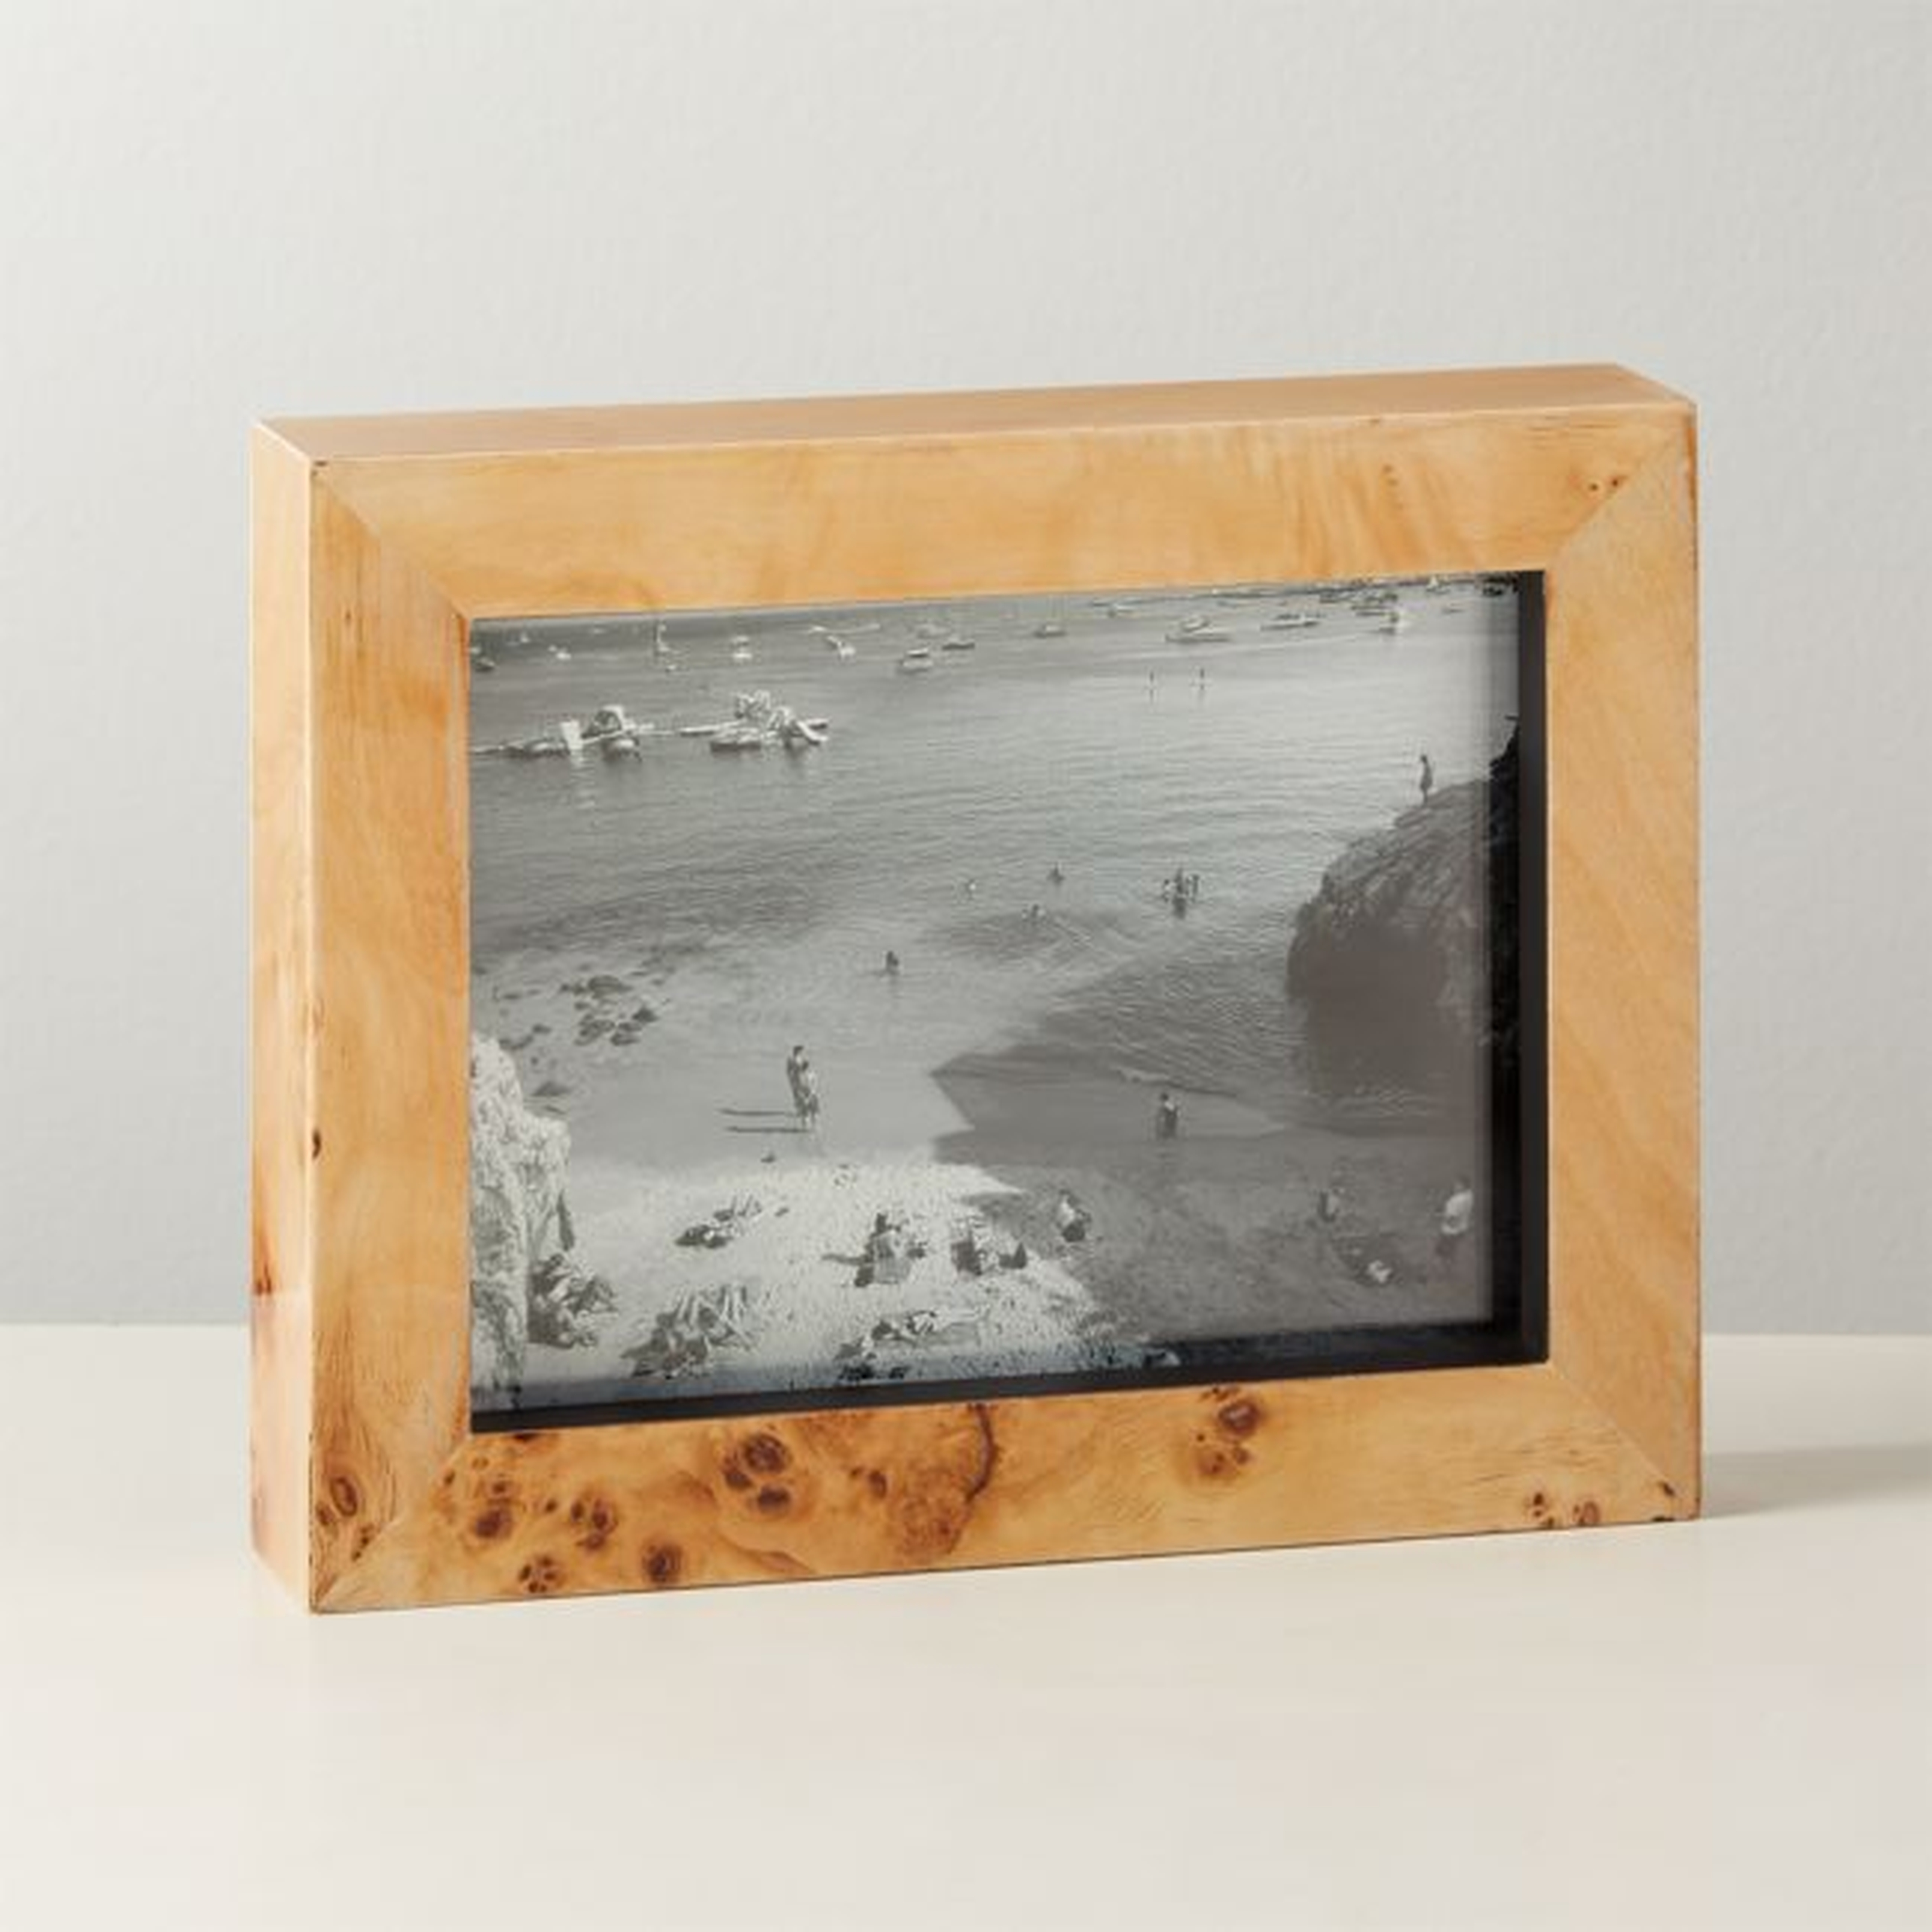 Burl Wood Picture Frame 5"x7"- Purchase now and we'll ship when it's available. Estimated in late June - CB2